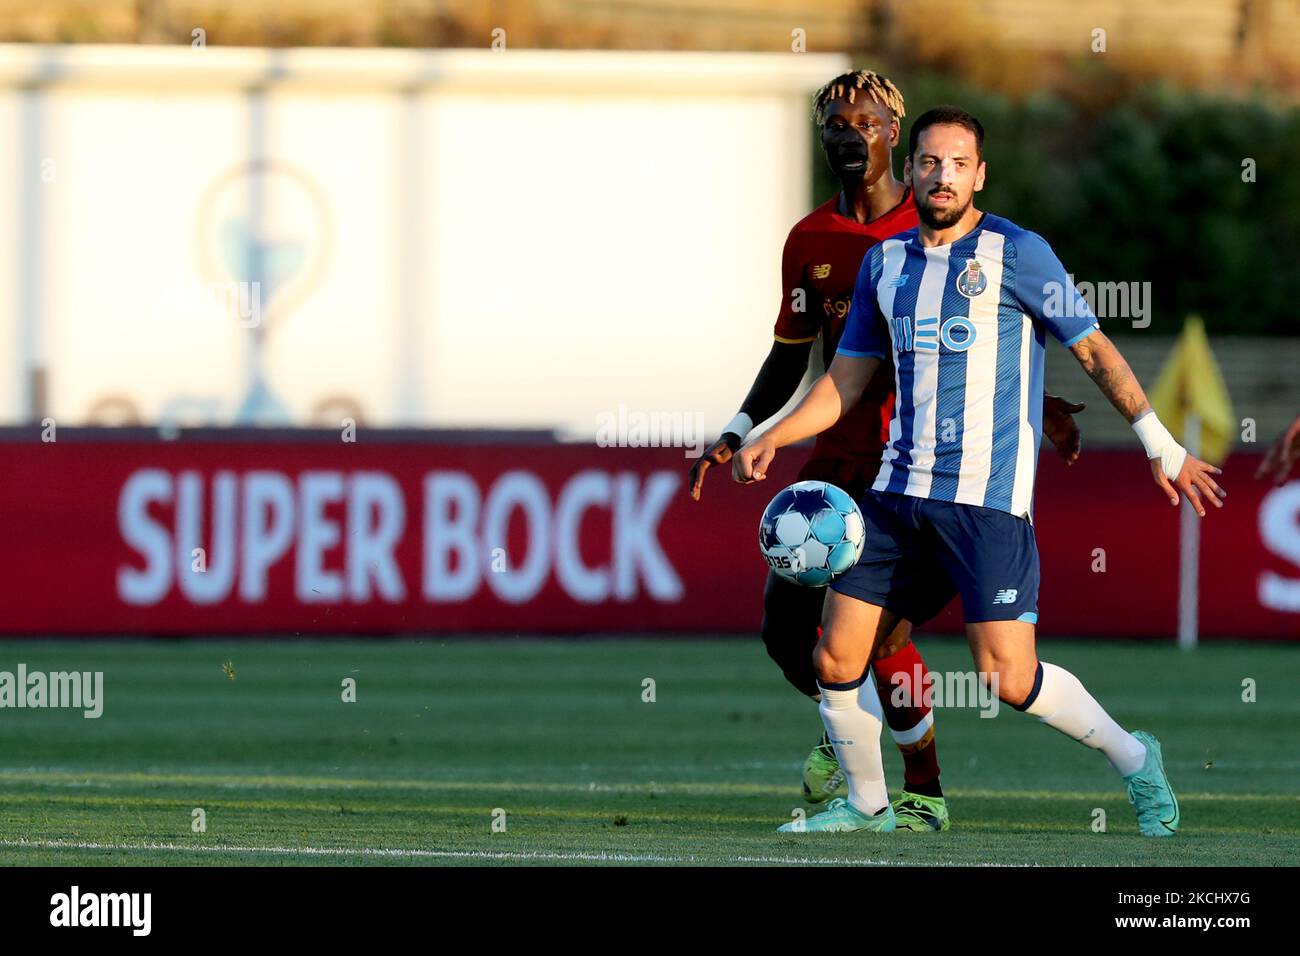 Bruno Costa of FC Porto (R ) vies with Ebrima Darboe of AS Roma during an international club friendly football match between AS Roma and FC Porto at the Bela Vista stadium in Lagoa, Portugal on July 28, 2021. (Photo by Pedro FiÃºza/NurPhoto) Stock Photo